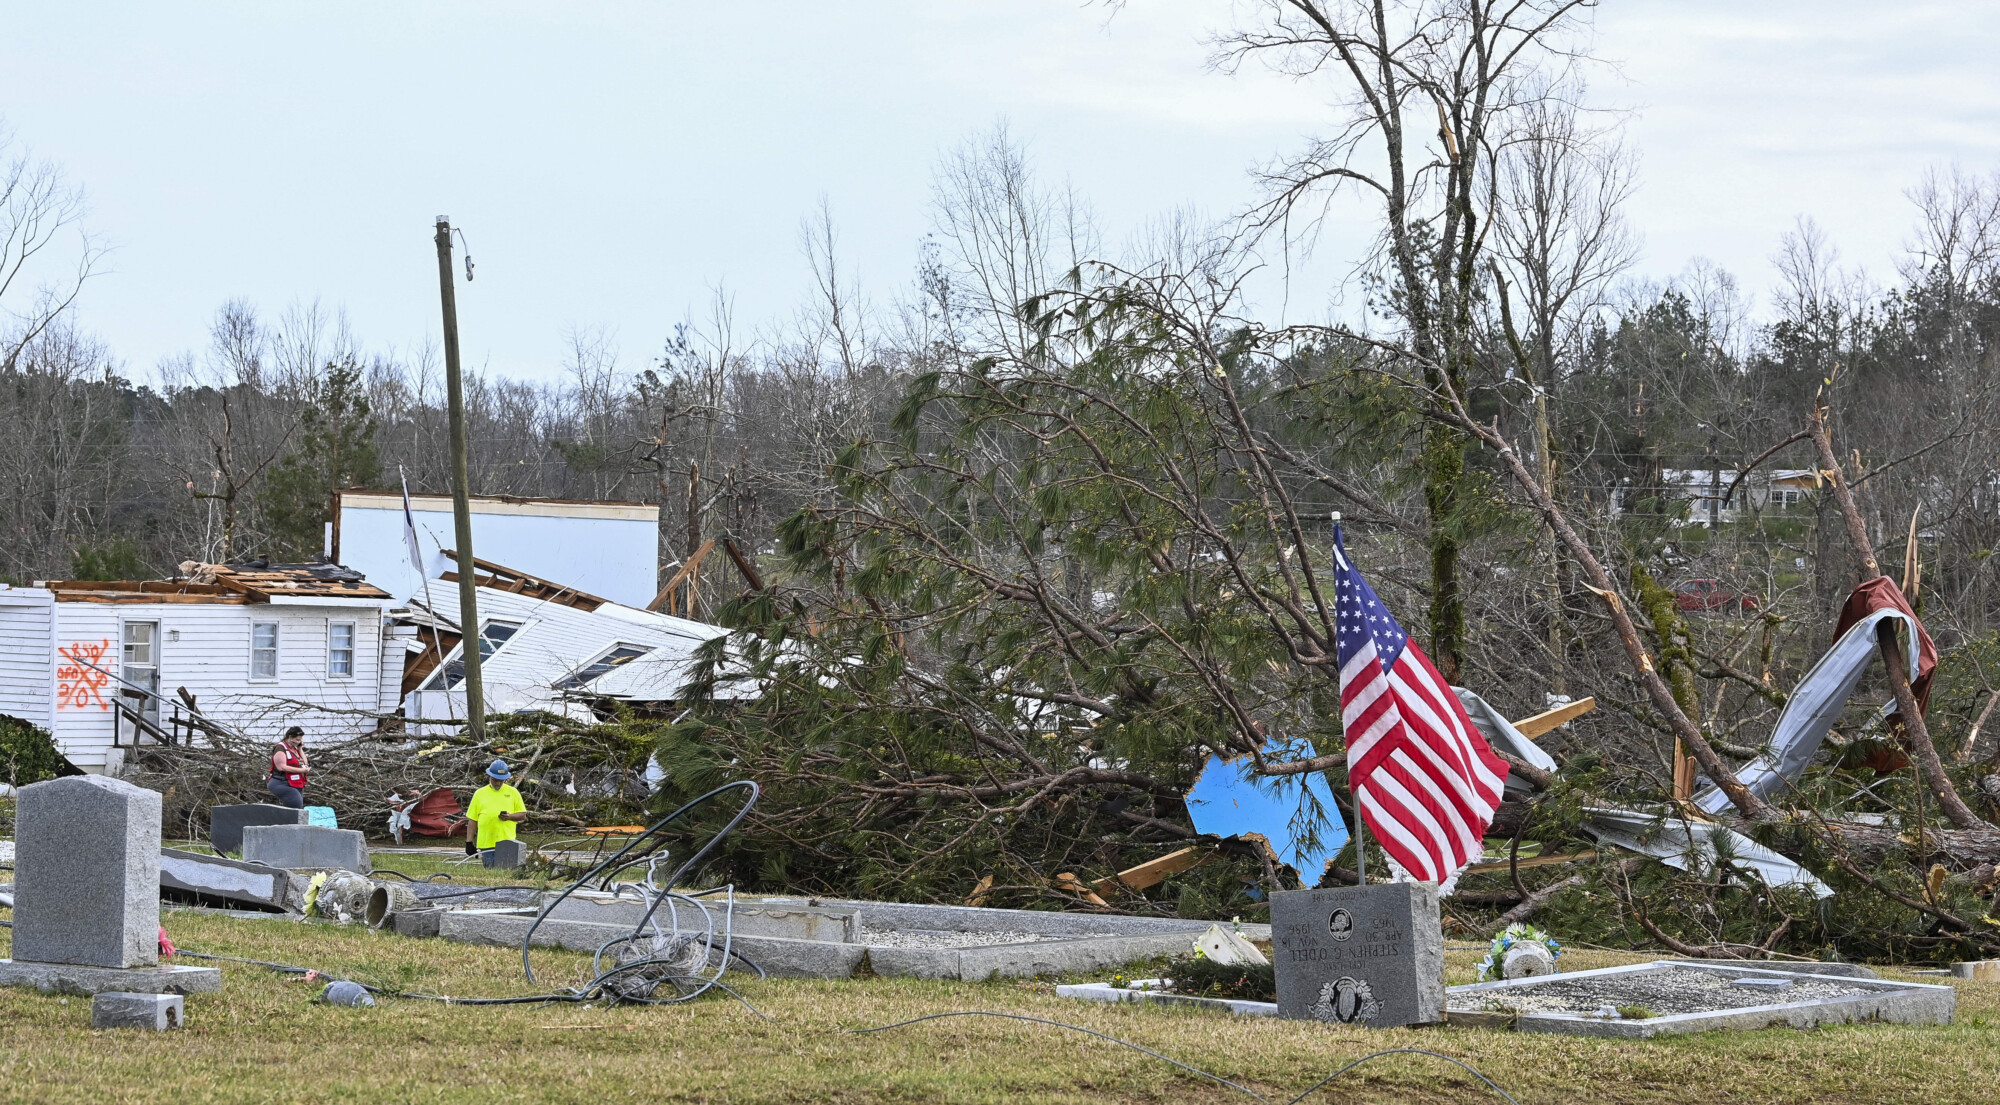 Southern States Wrecked by Wave of Tornadoes